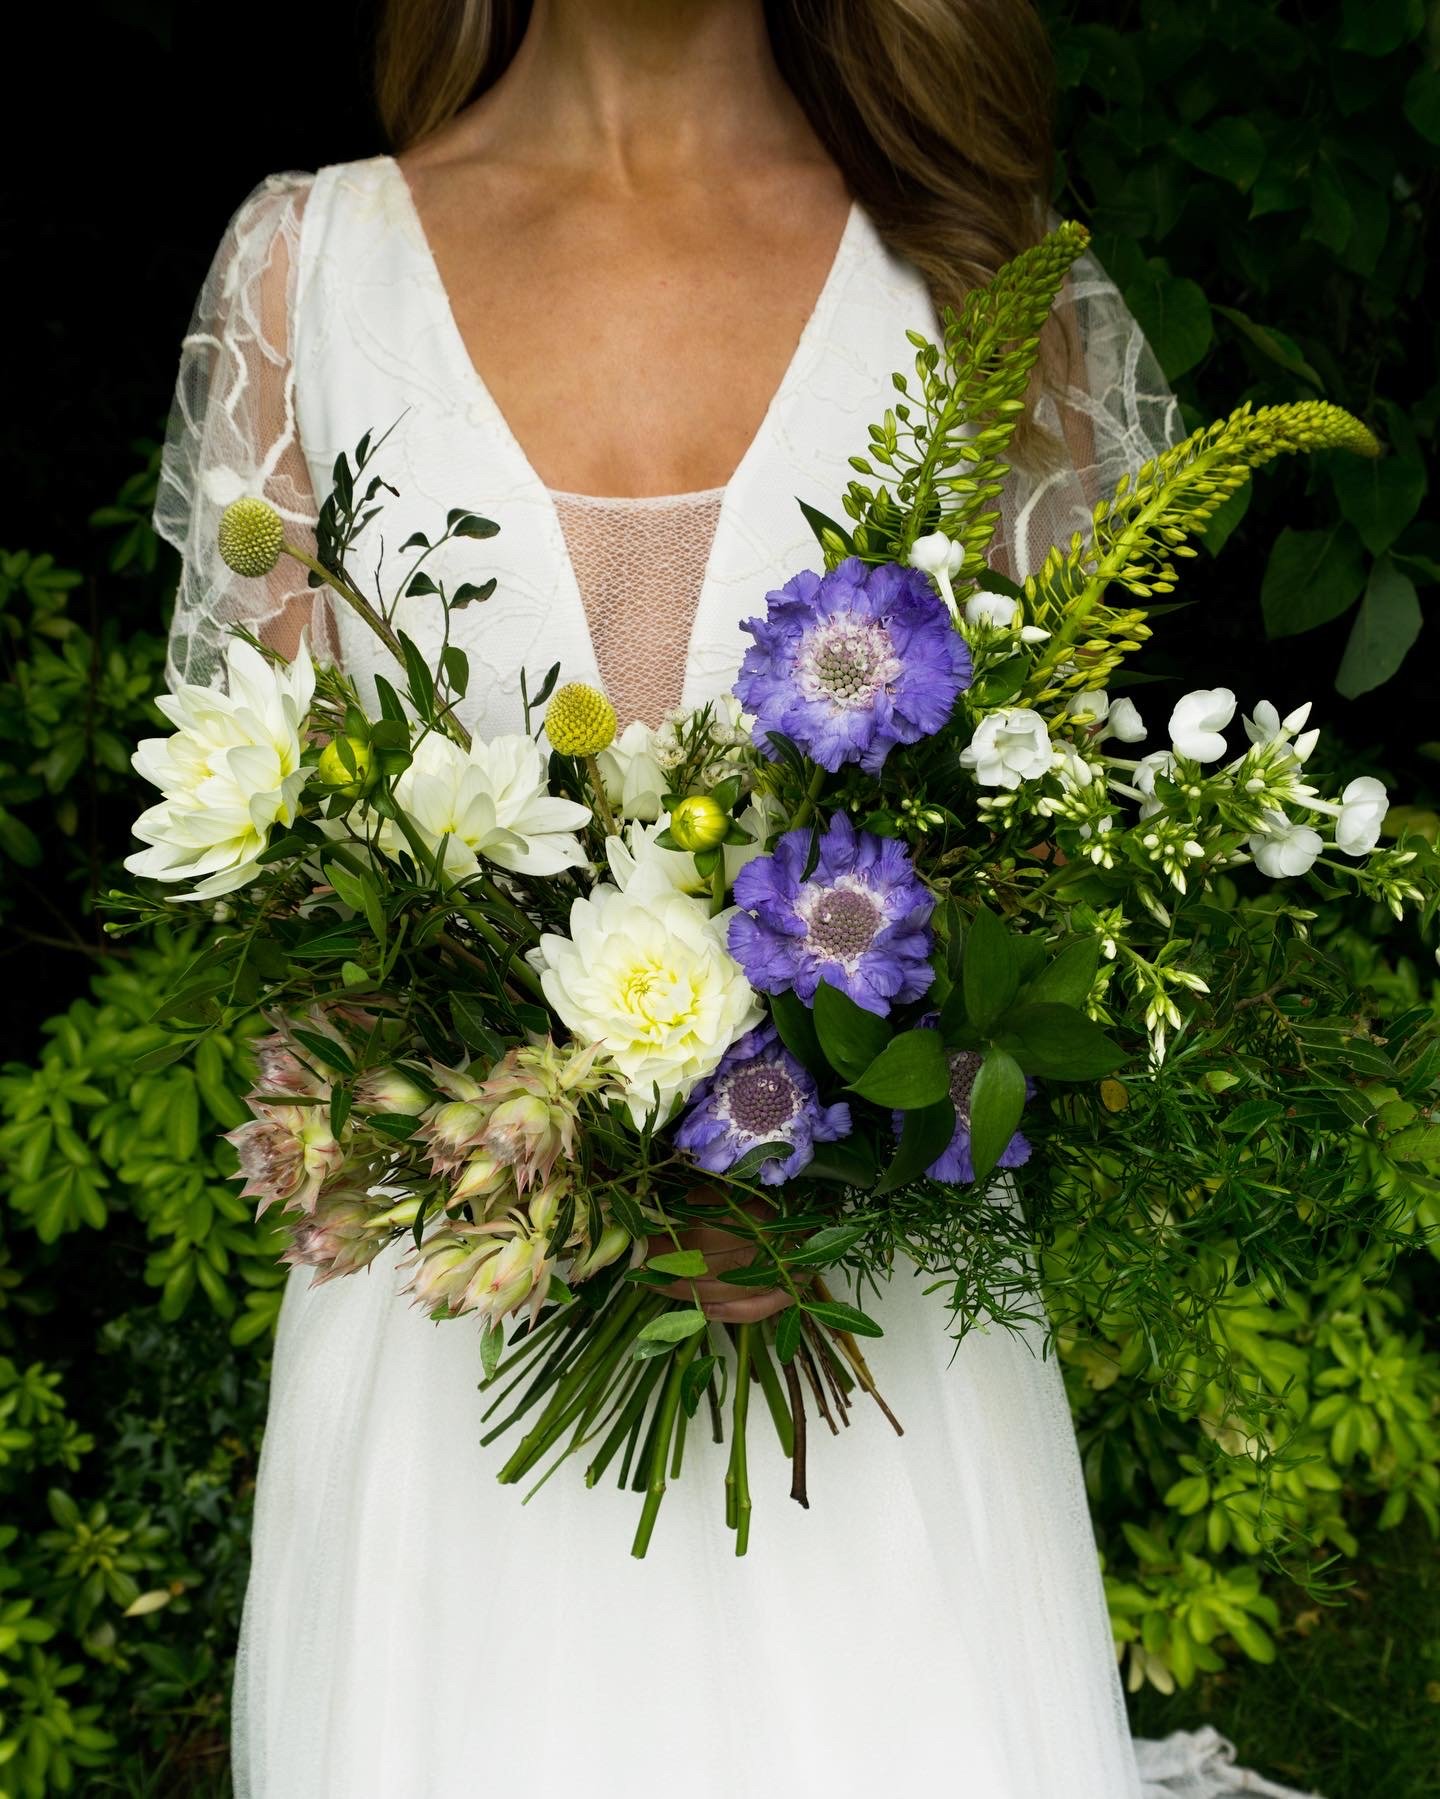  Stunning, bold bridal bouquet. The modern Glasgow based wedding florist has created a statement hand-tied floral arrangement using cream and neutral blooms with pops of blue and green foliage. 